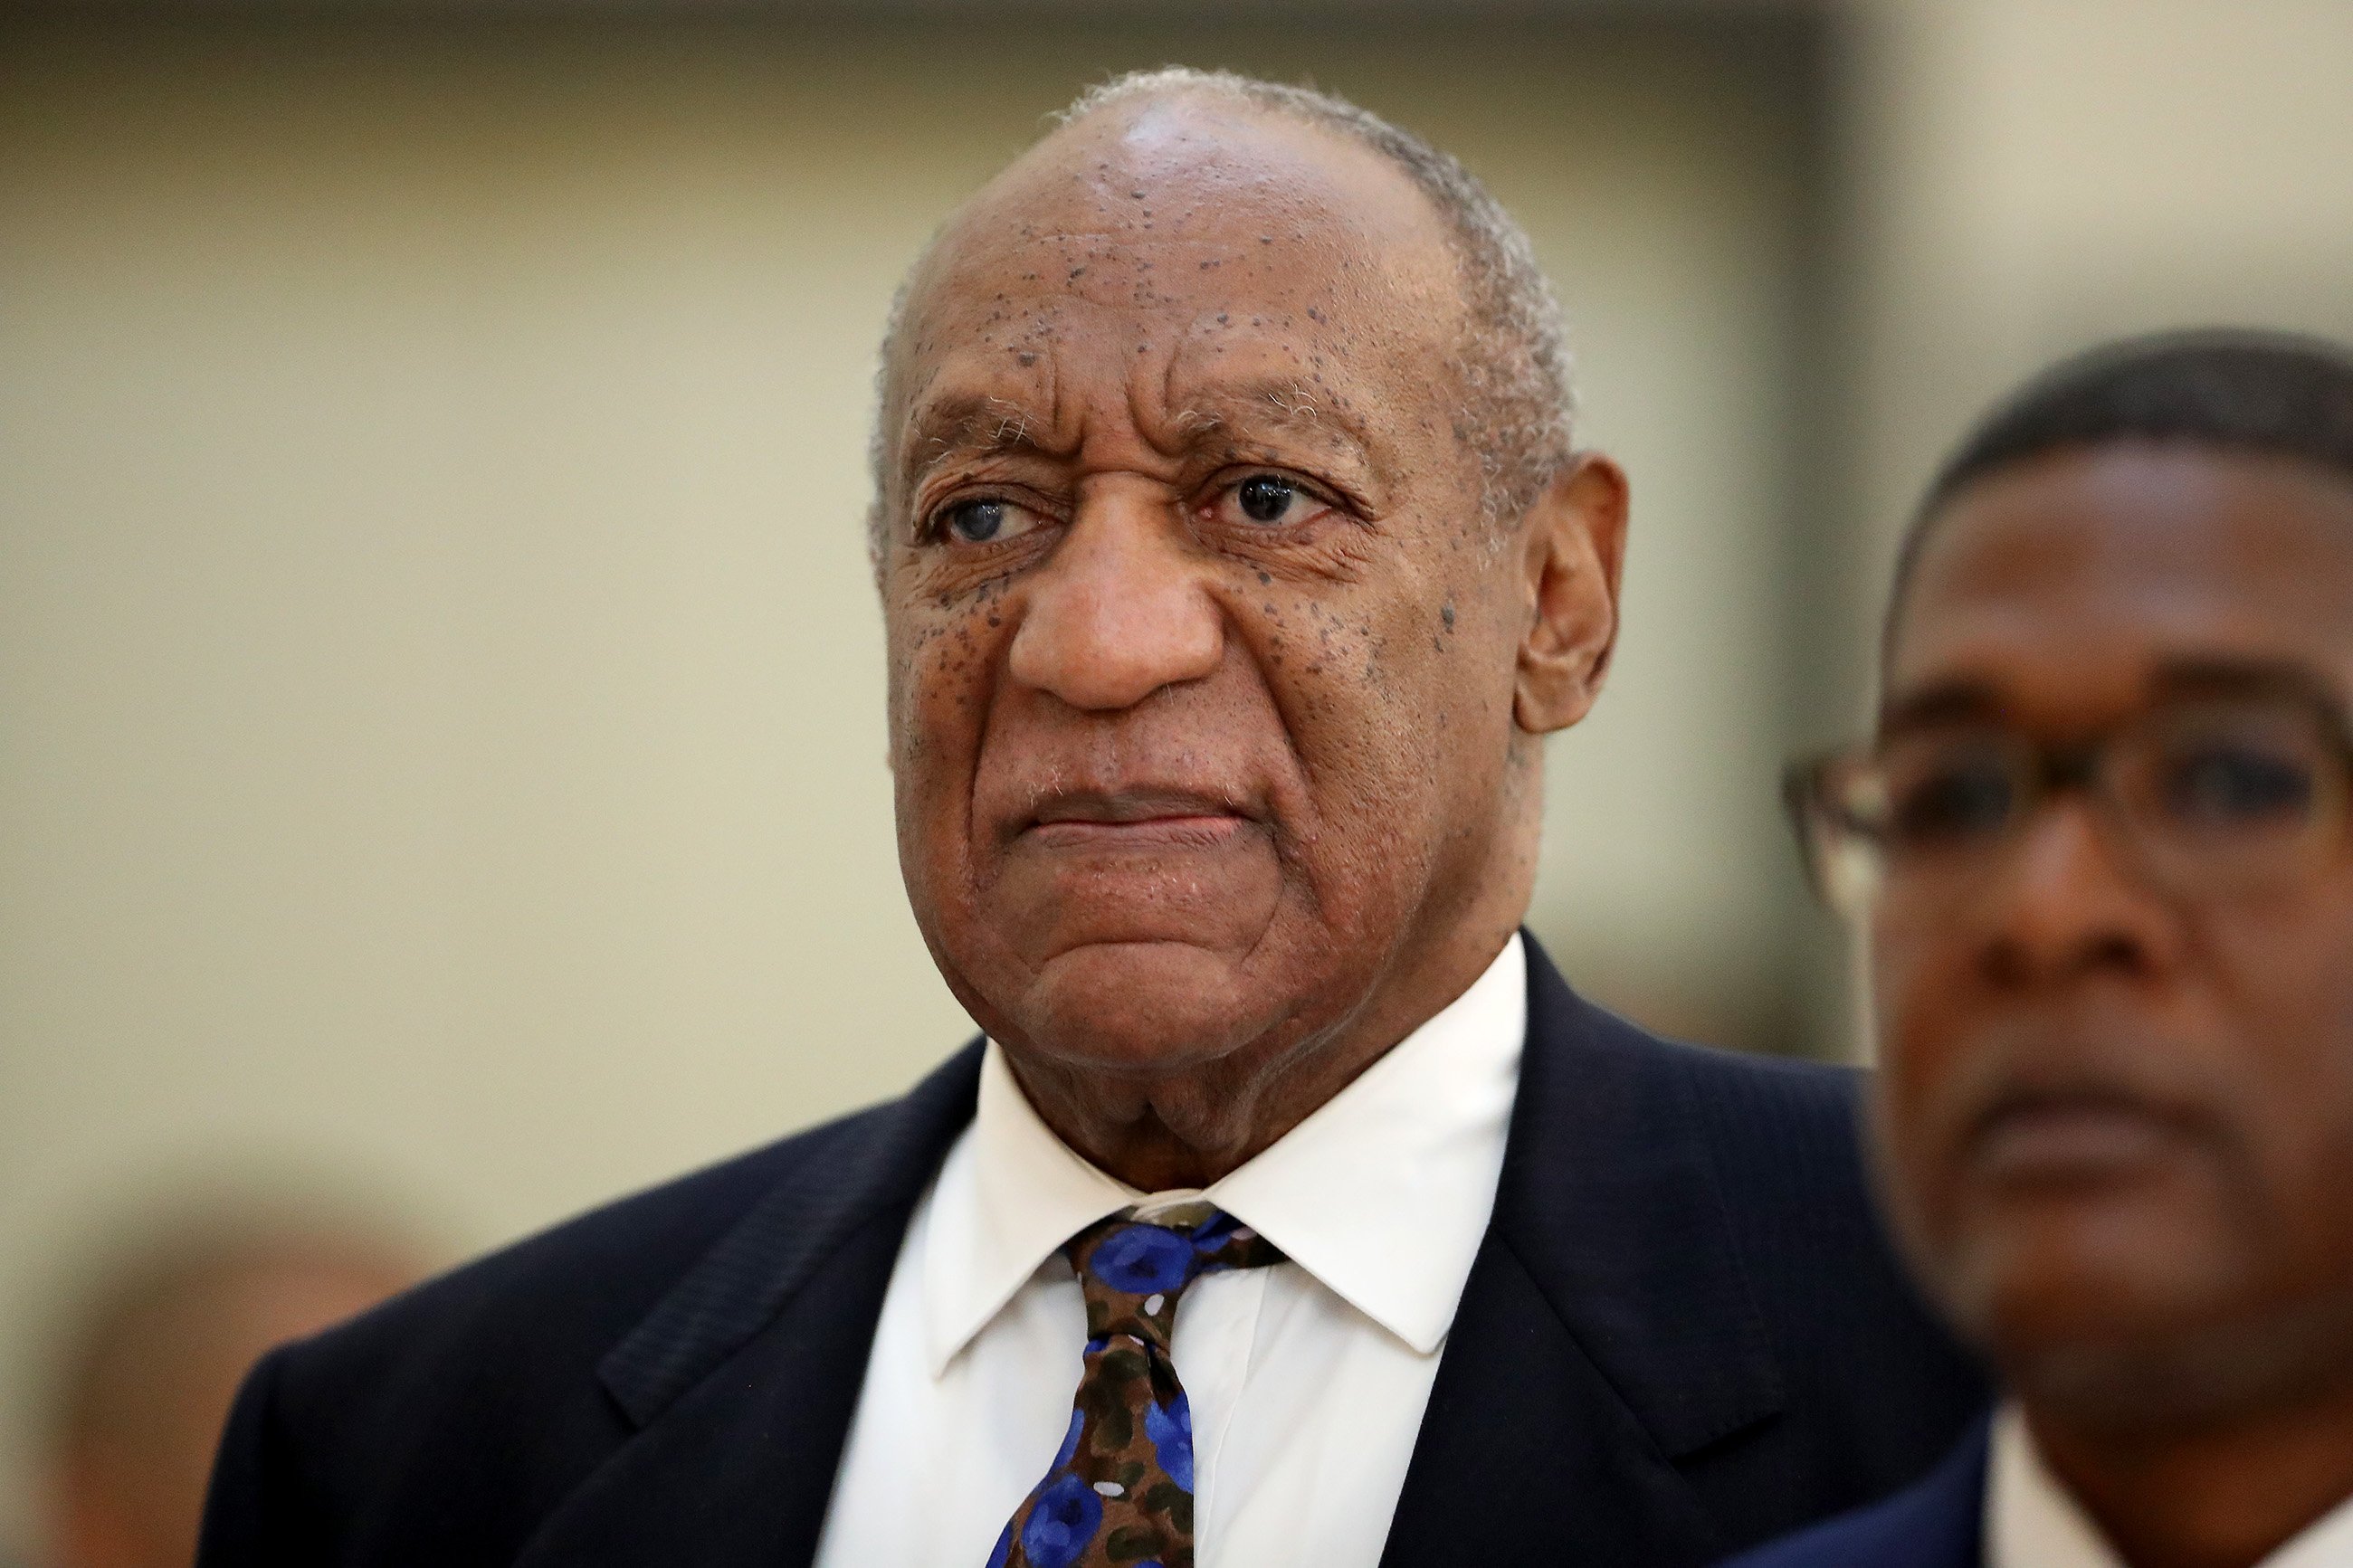 Bill Cosbyat the Montgomery County Courthouse, during his sexual assault trial sentencing in Norristown, Pennsylvania, U.S. September 24, 2018. | Photo: GettyImages